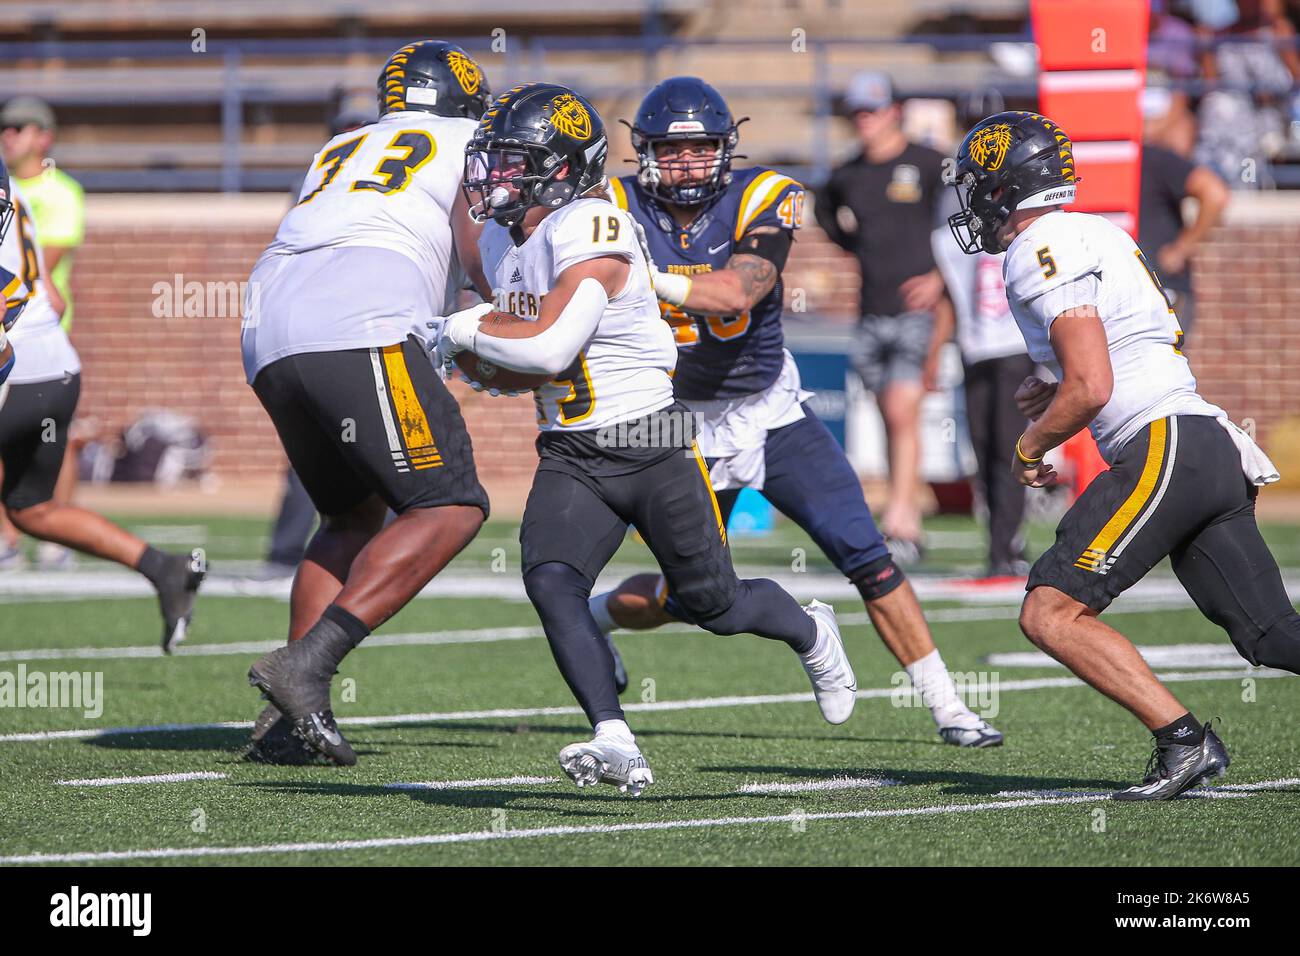 Edmond, OK, USA. 15th Oct, 2022. Ft Hays State University Tigers wide receiver Trevor Watts (19) runs with the ball during the NCAA football game between the Fort Hayes State University Tigers and the University of Central Oklahoma Broncos at Chad Richison Stadium in Edmond, OK. Ron Lane/CSM/Alamy Live News Stock Photo